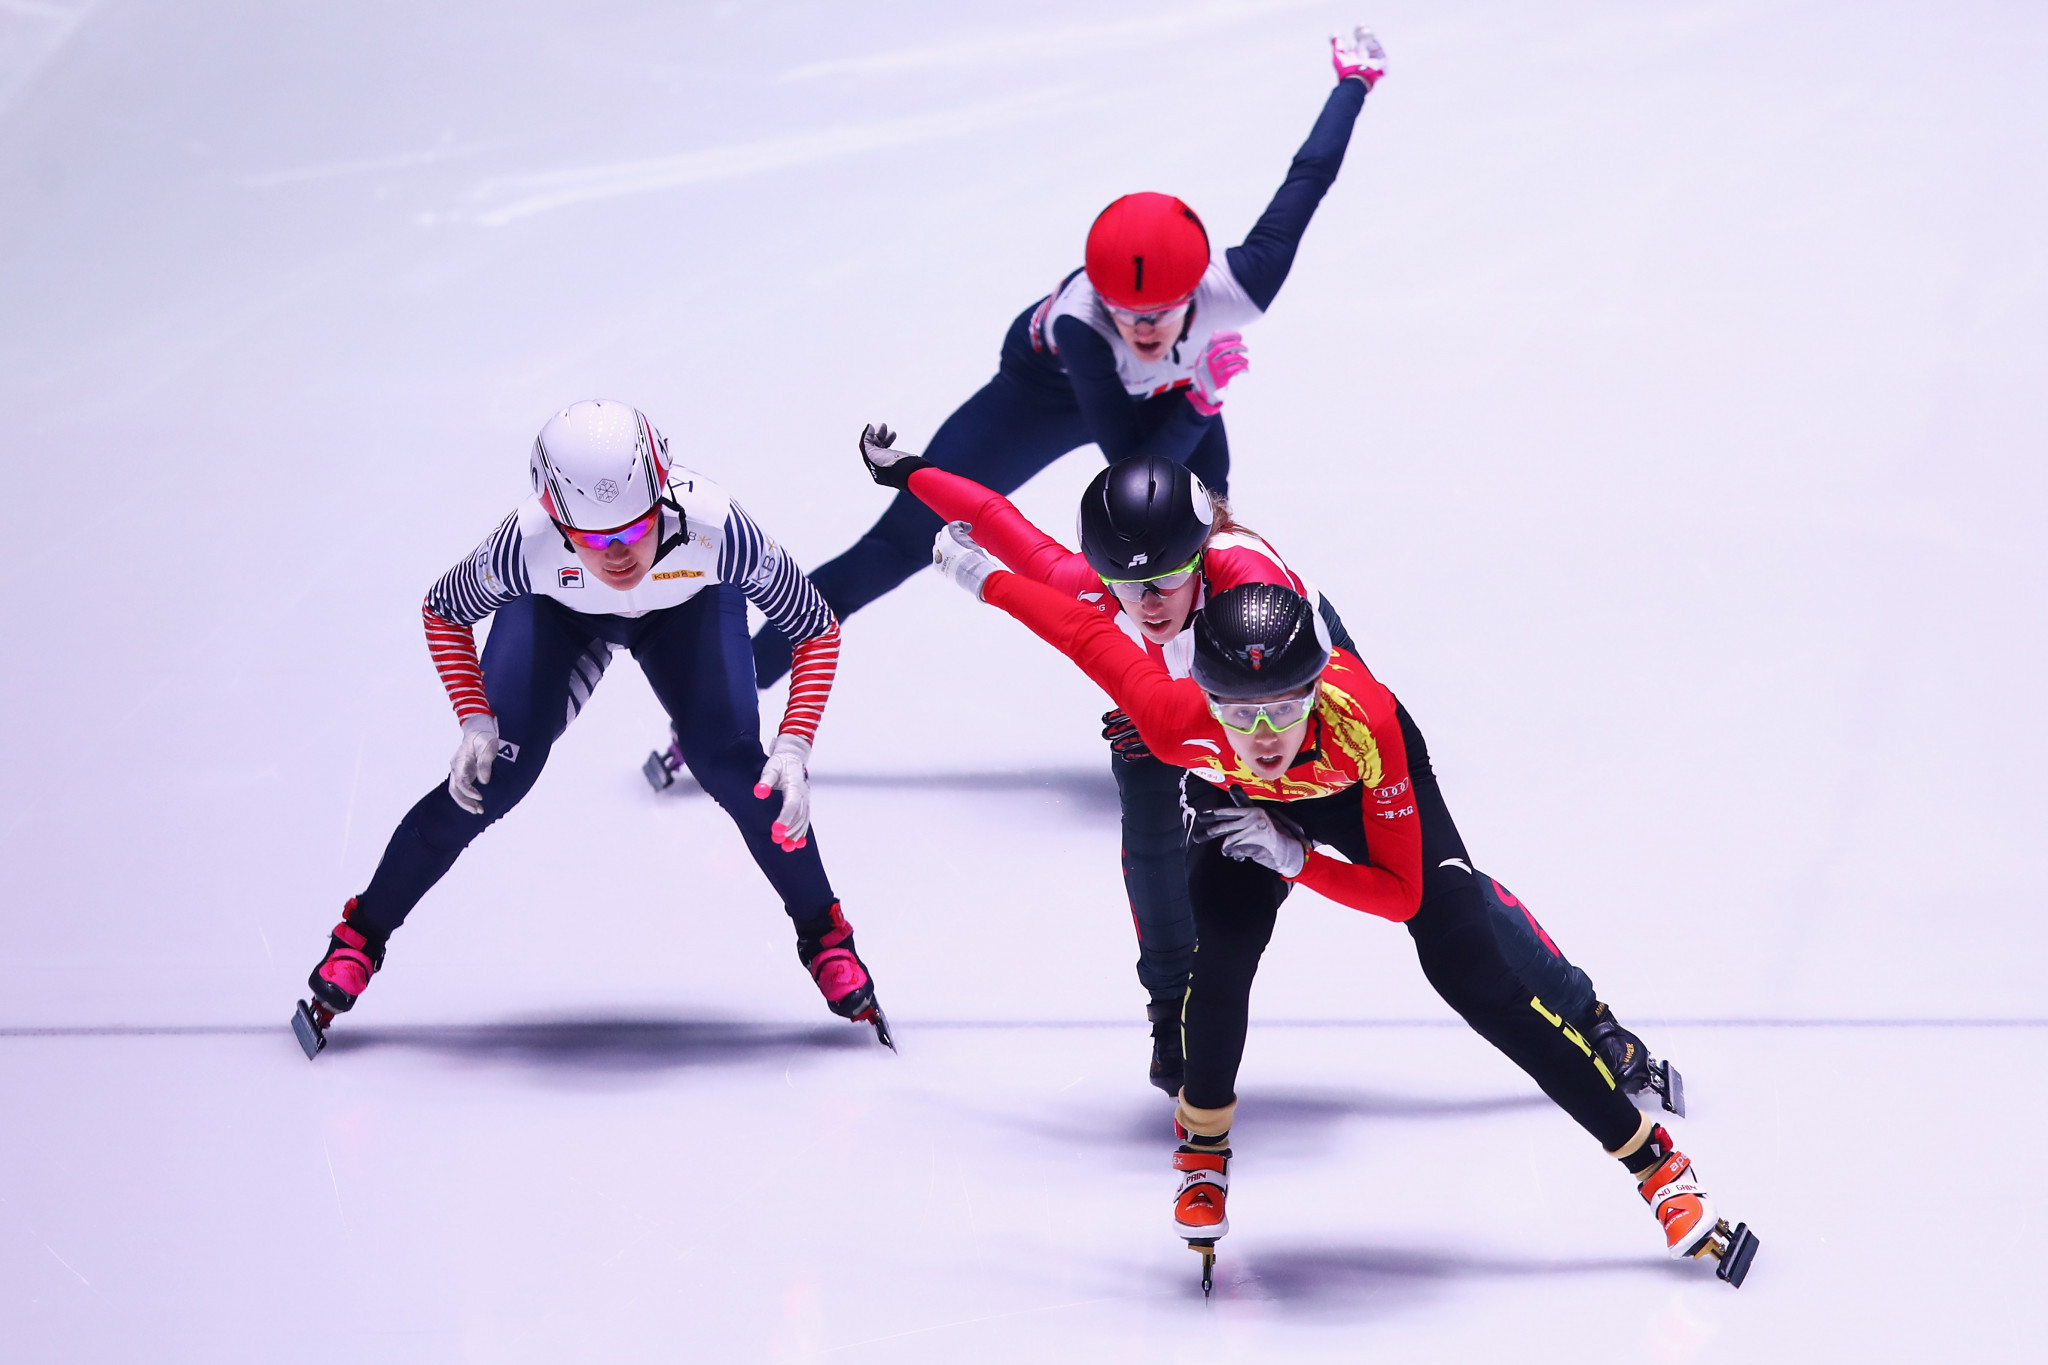 Olympic silver medallist disqualified in 1,000m at ISU Short Track World Cup